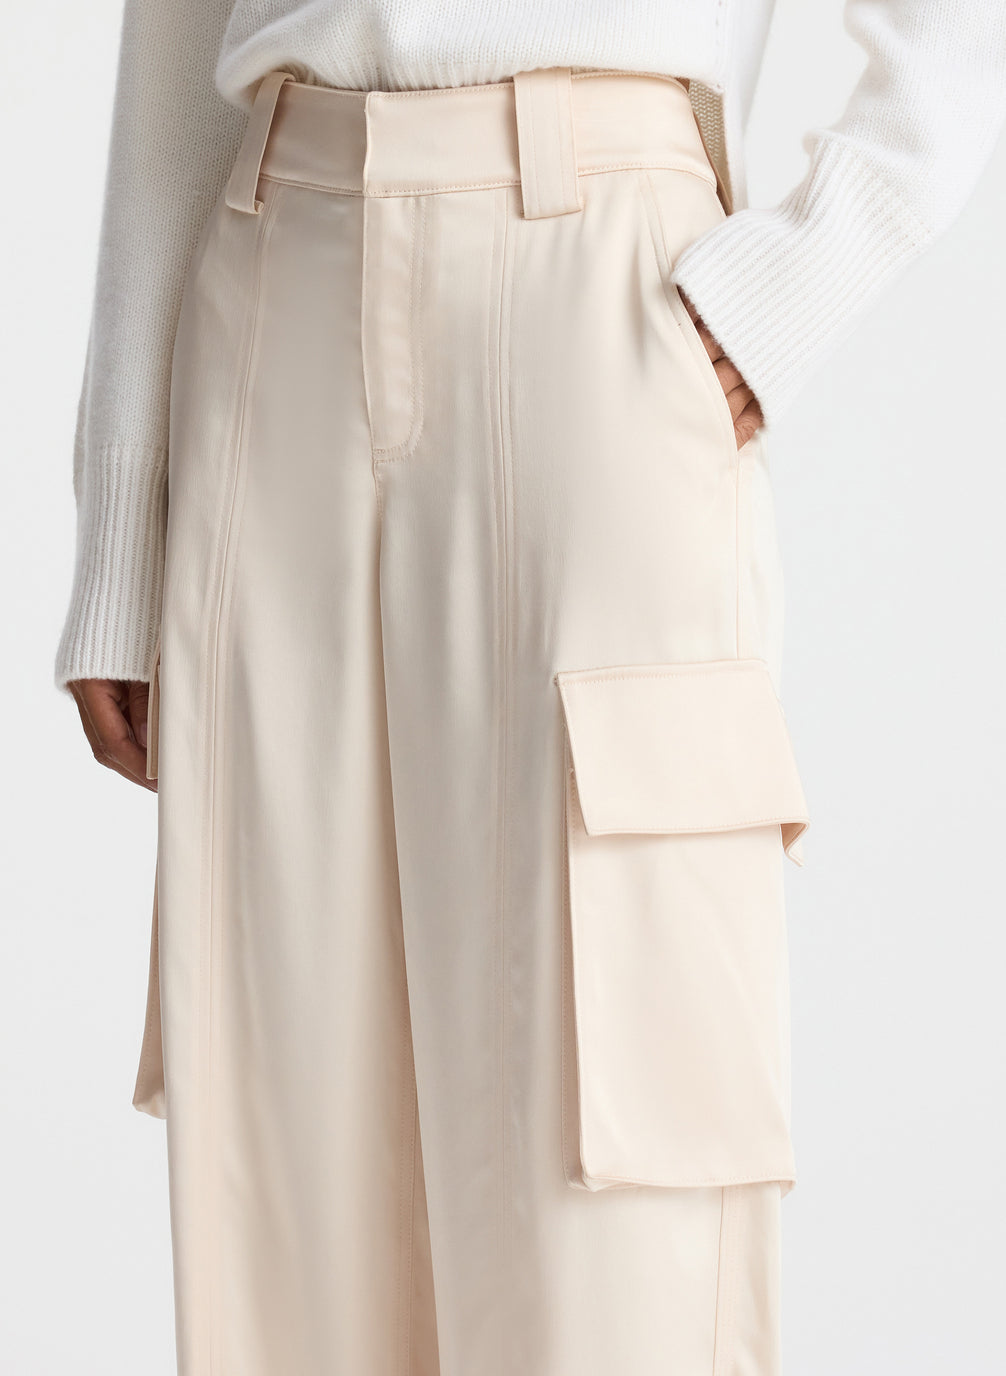 detail view of woman wearing white sweater and beige satin cargo pants